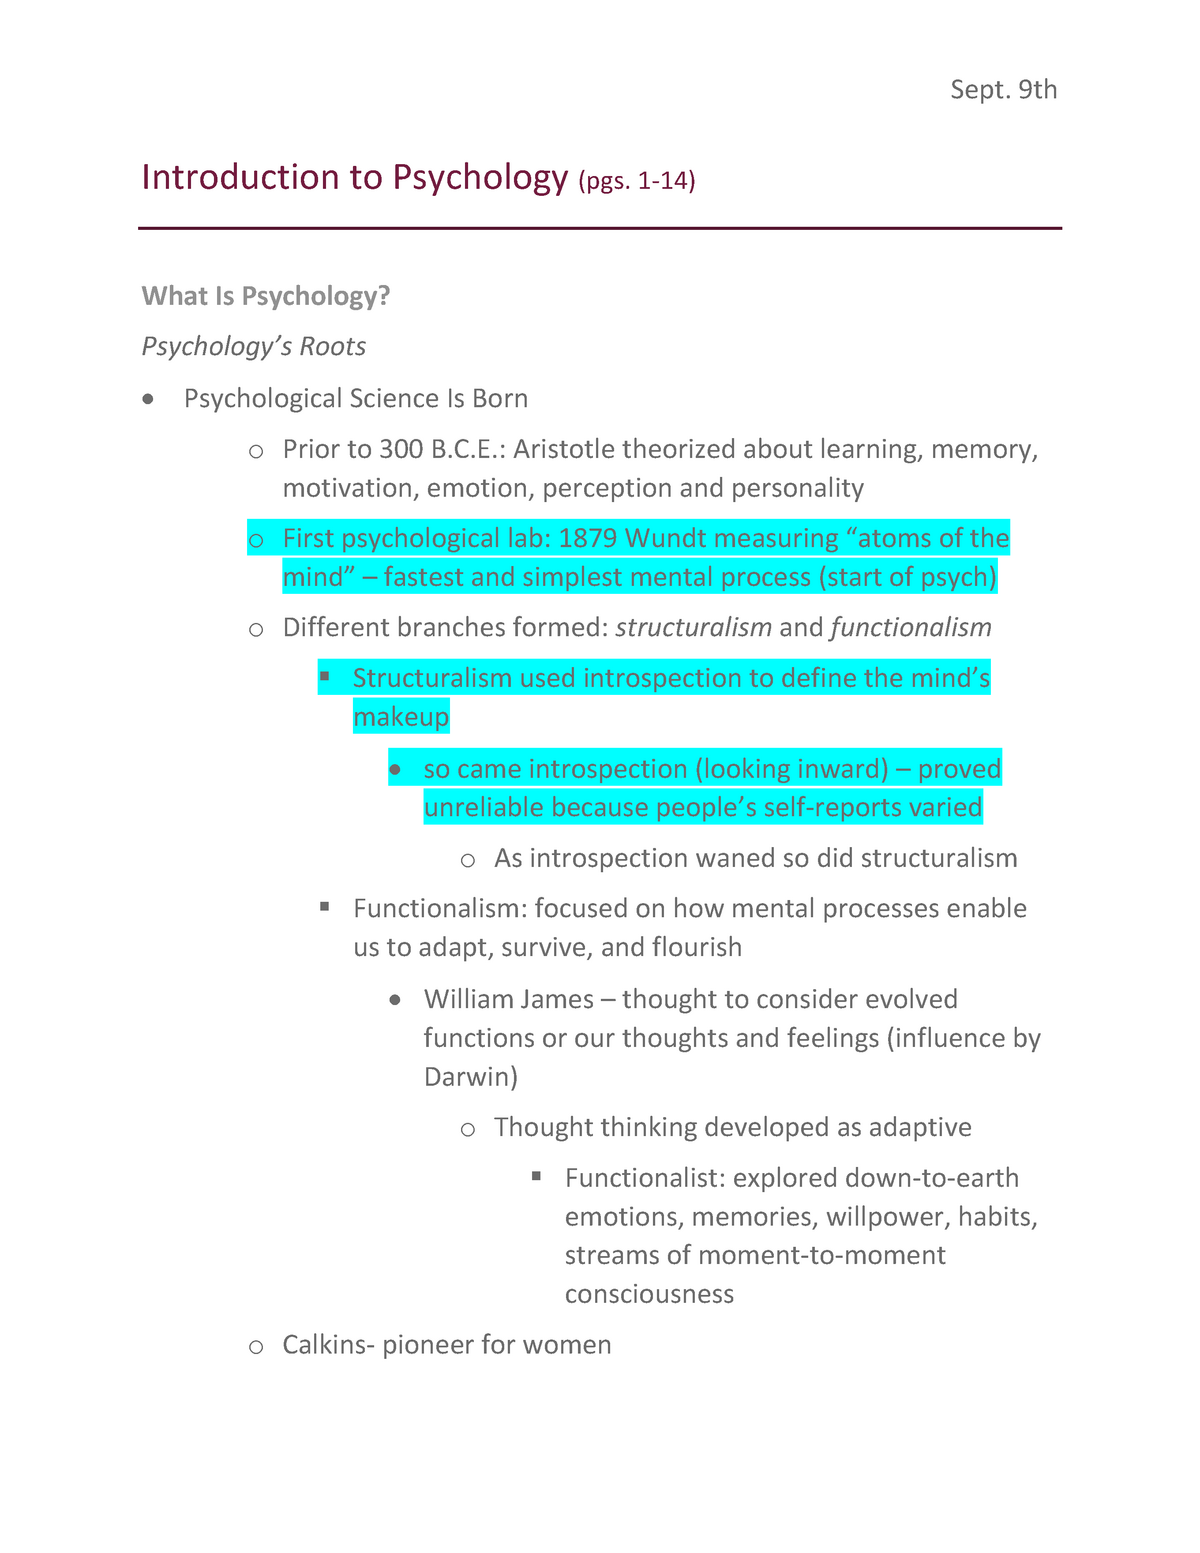 essay introduction to psychology